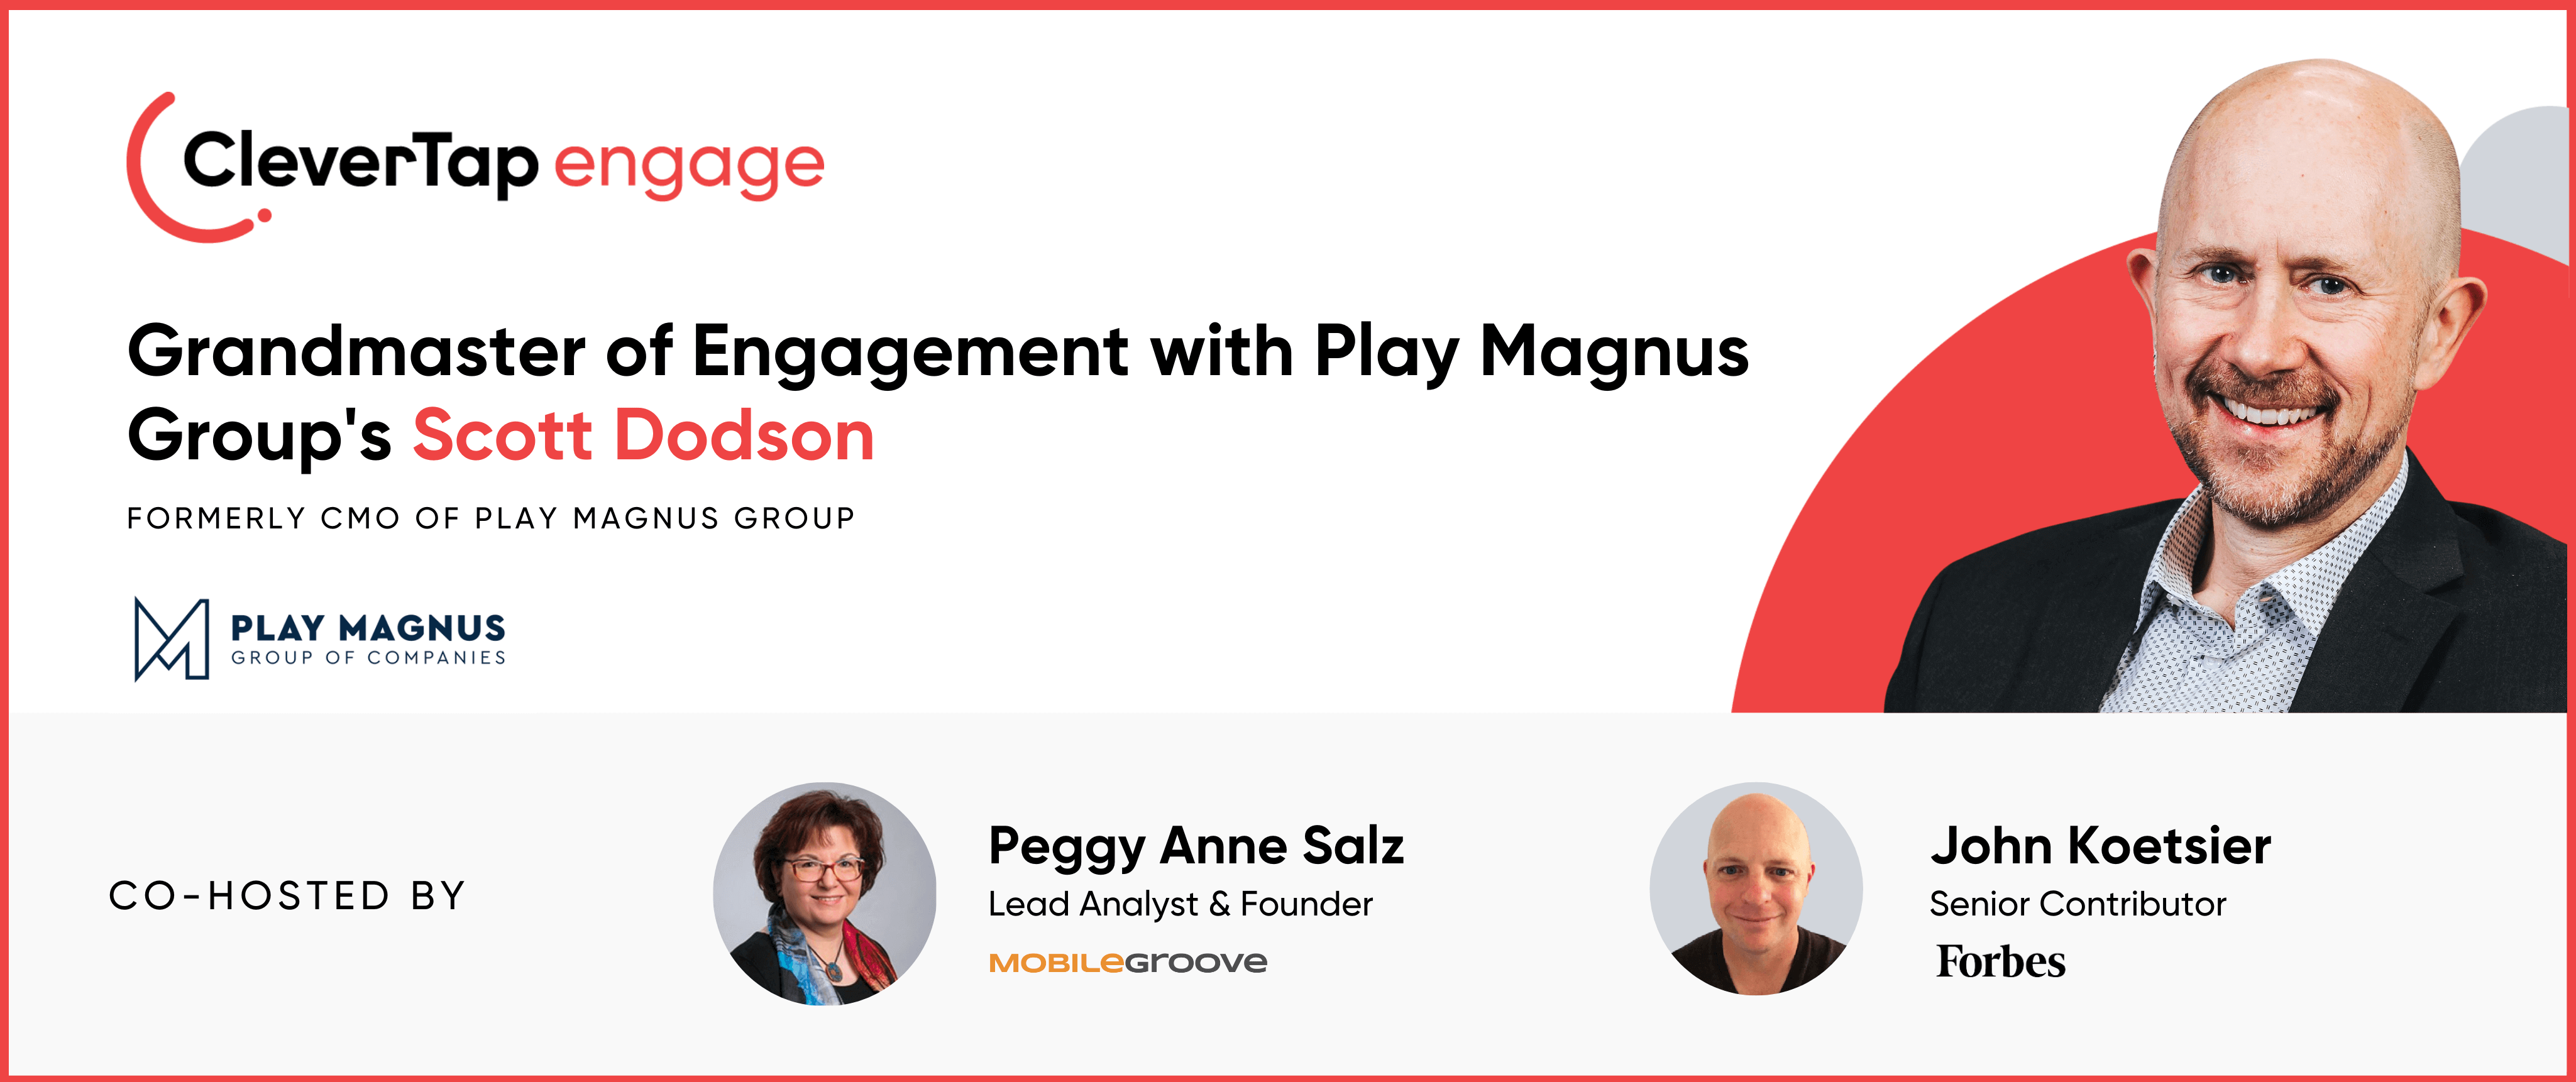 chess24 and Play Magnus join forces